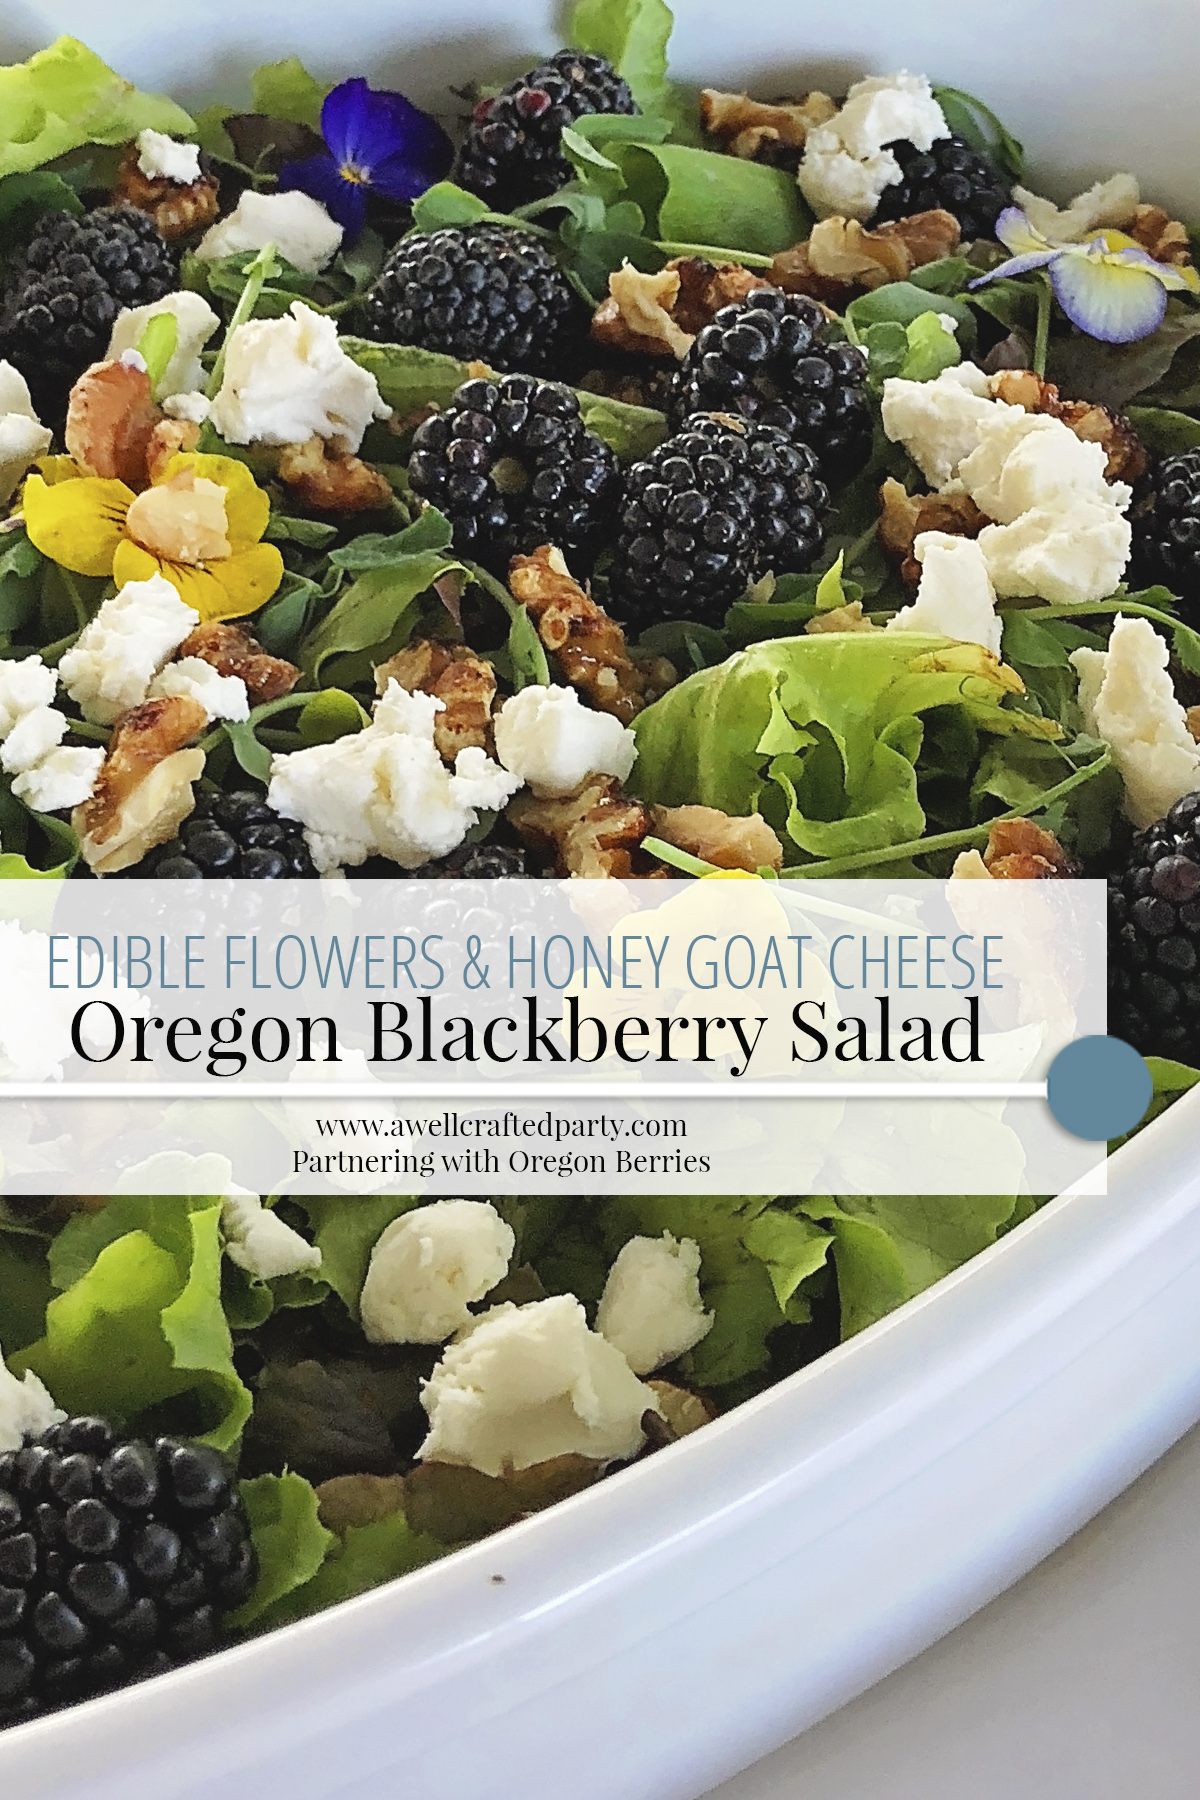 Blackberry and Edible Flower Salad | A Well Crafted Party